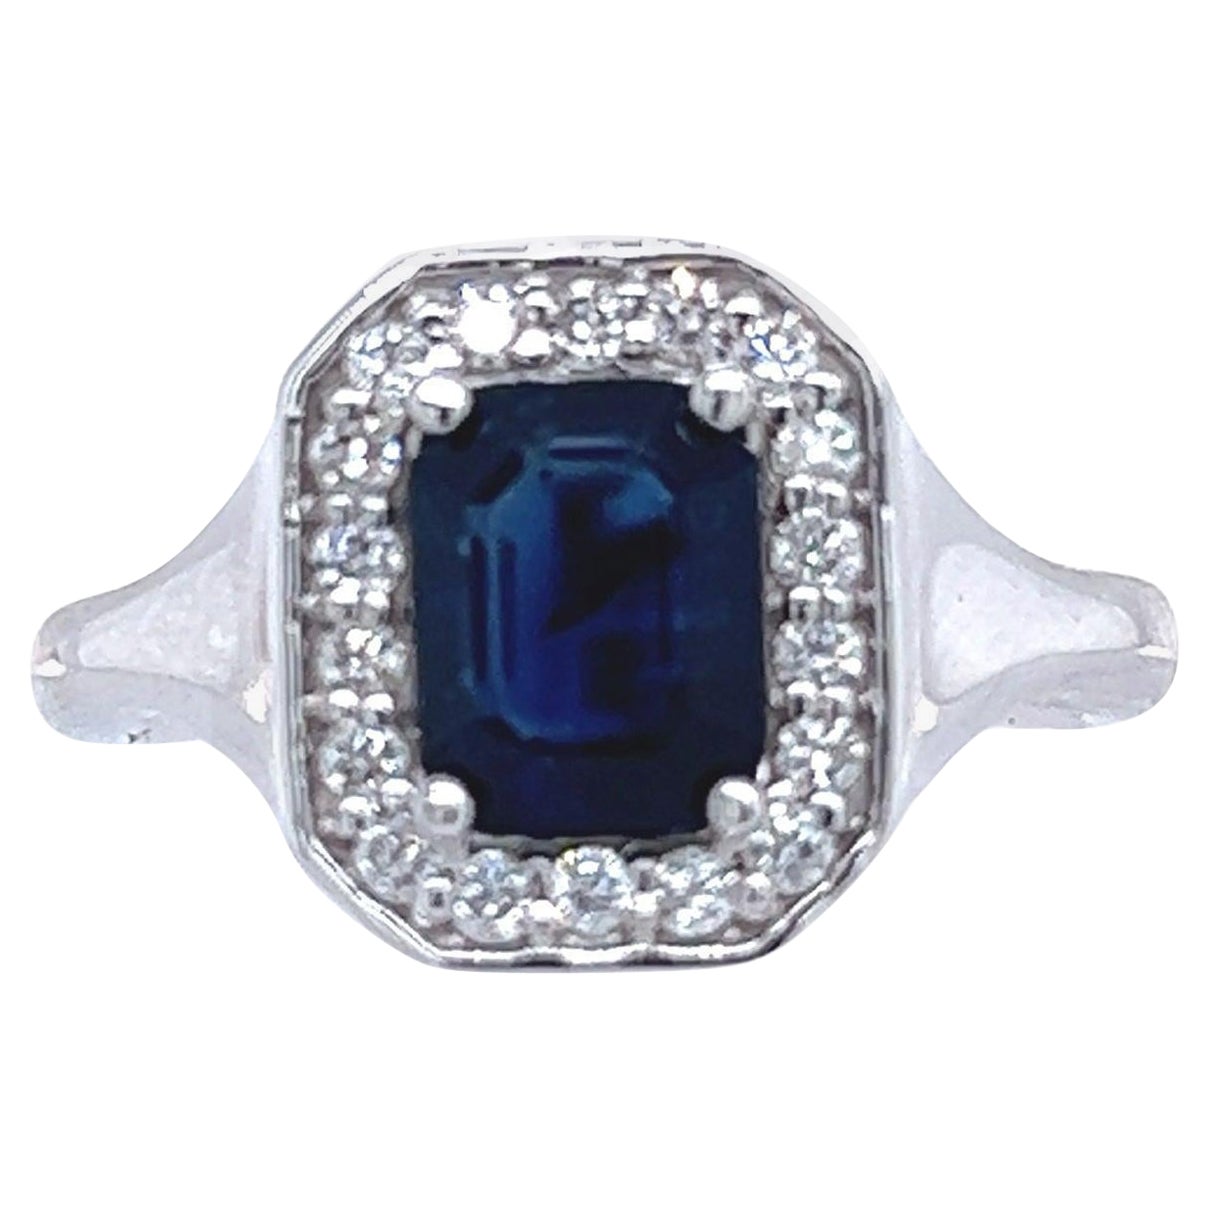 Natural Sapphire Diamond Ring 14k W Gold 1.82 TCW Certified For Sale